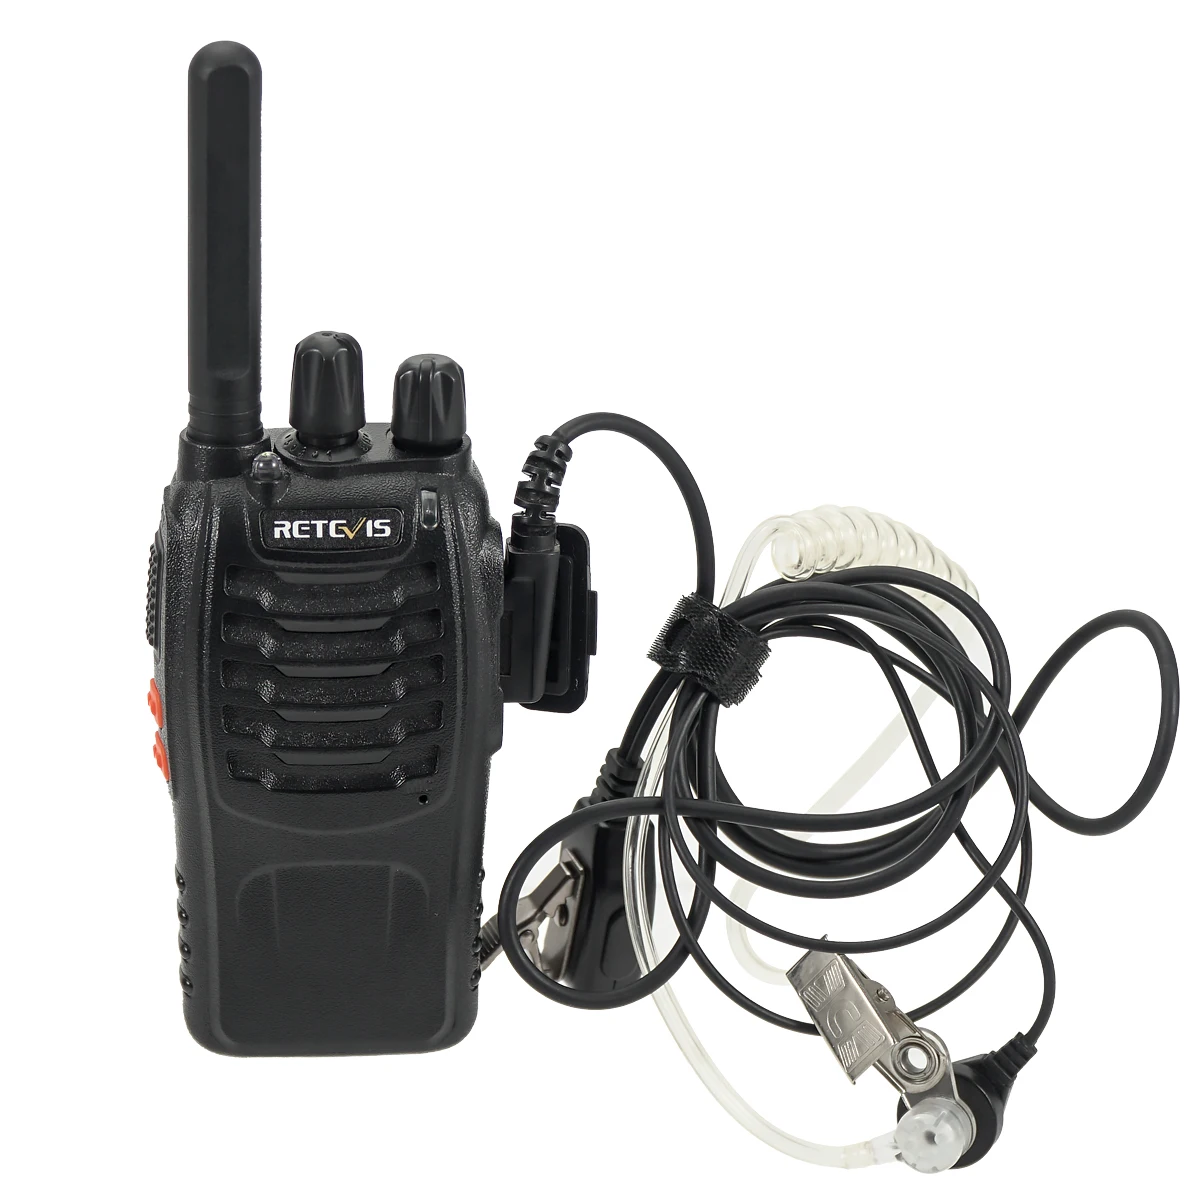 

Retevis H777 Commercial Walkie Talkie with Air Tube Earpiece Two Way Radios UHF Two Way Radios USB charger 16CH